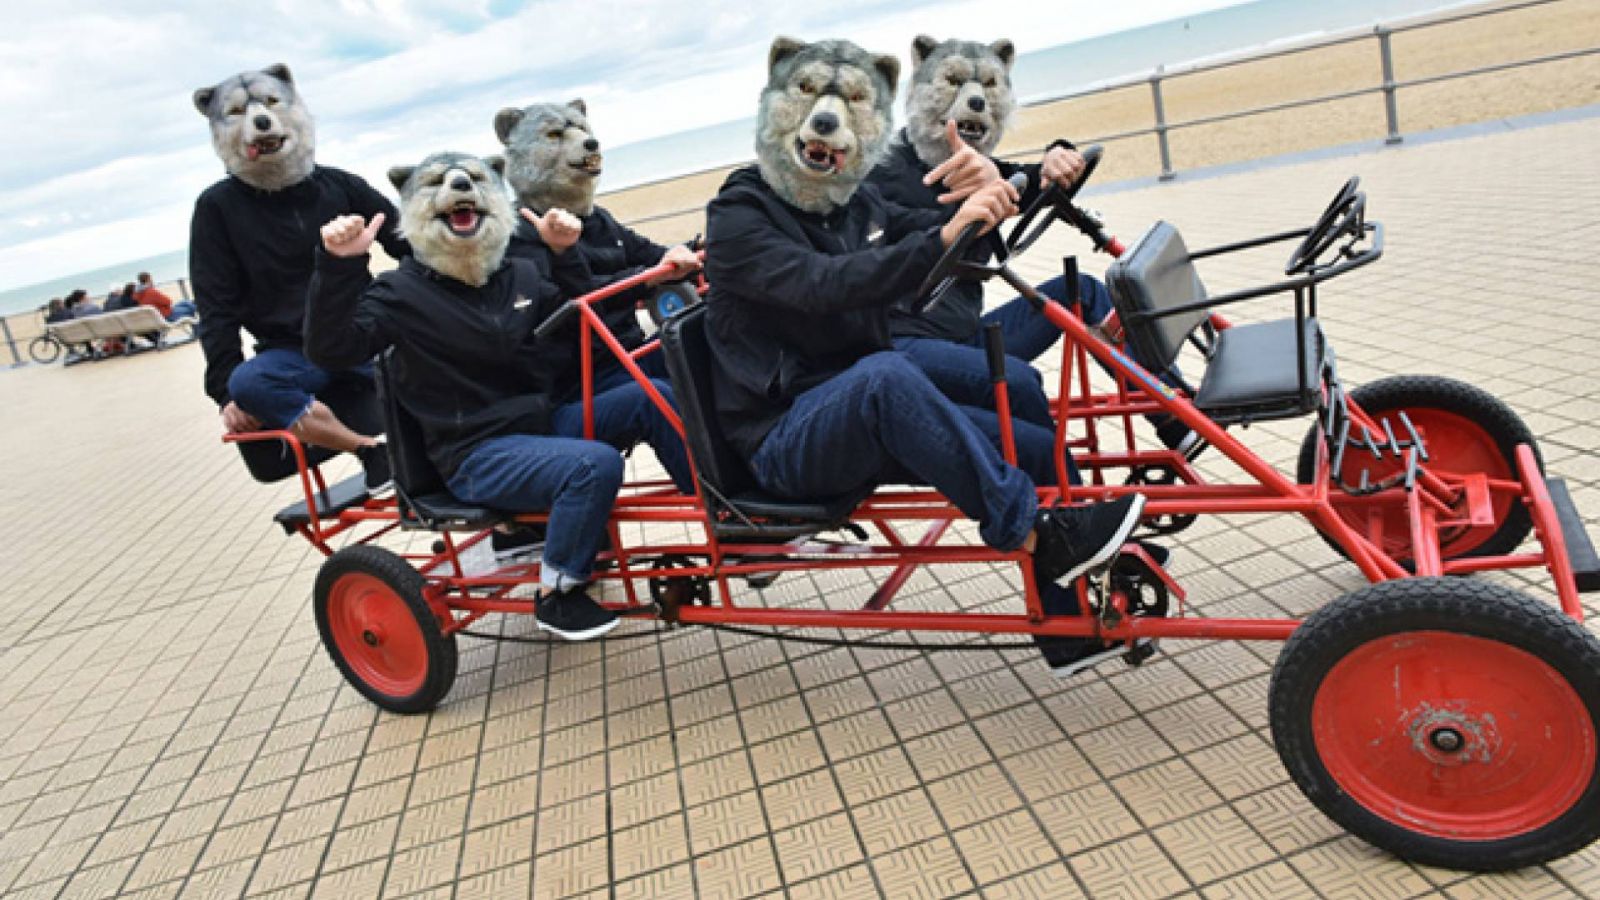 Entrevista con MAN WITH A MISSION © Sony Music Entertainment (Japan) Inc. All rights reserved.